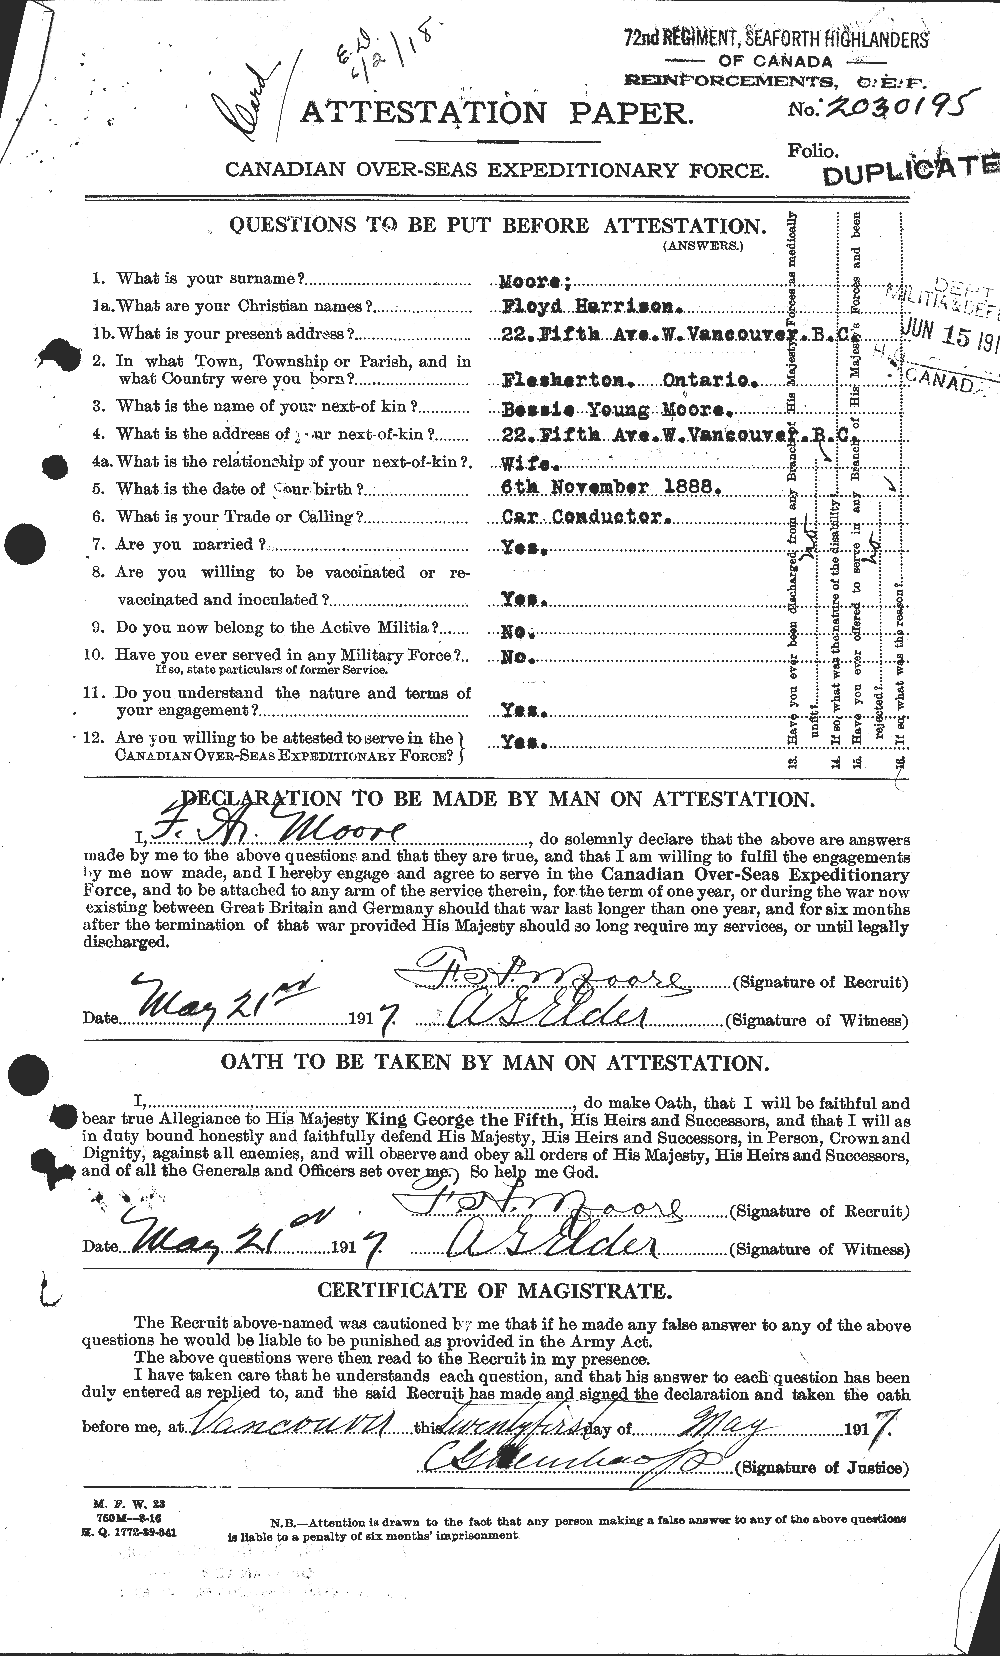 Personnel Records of the First World War - CEF 506682a